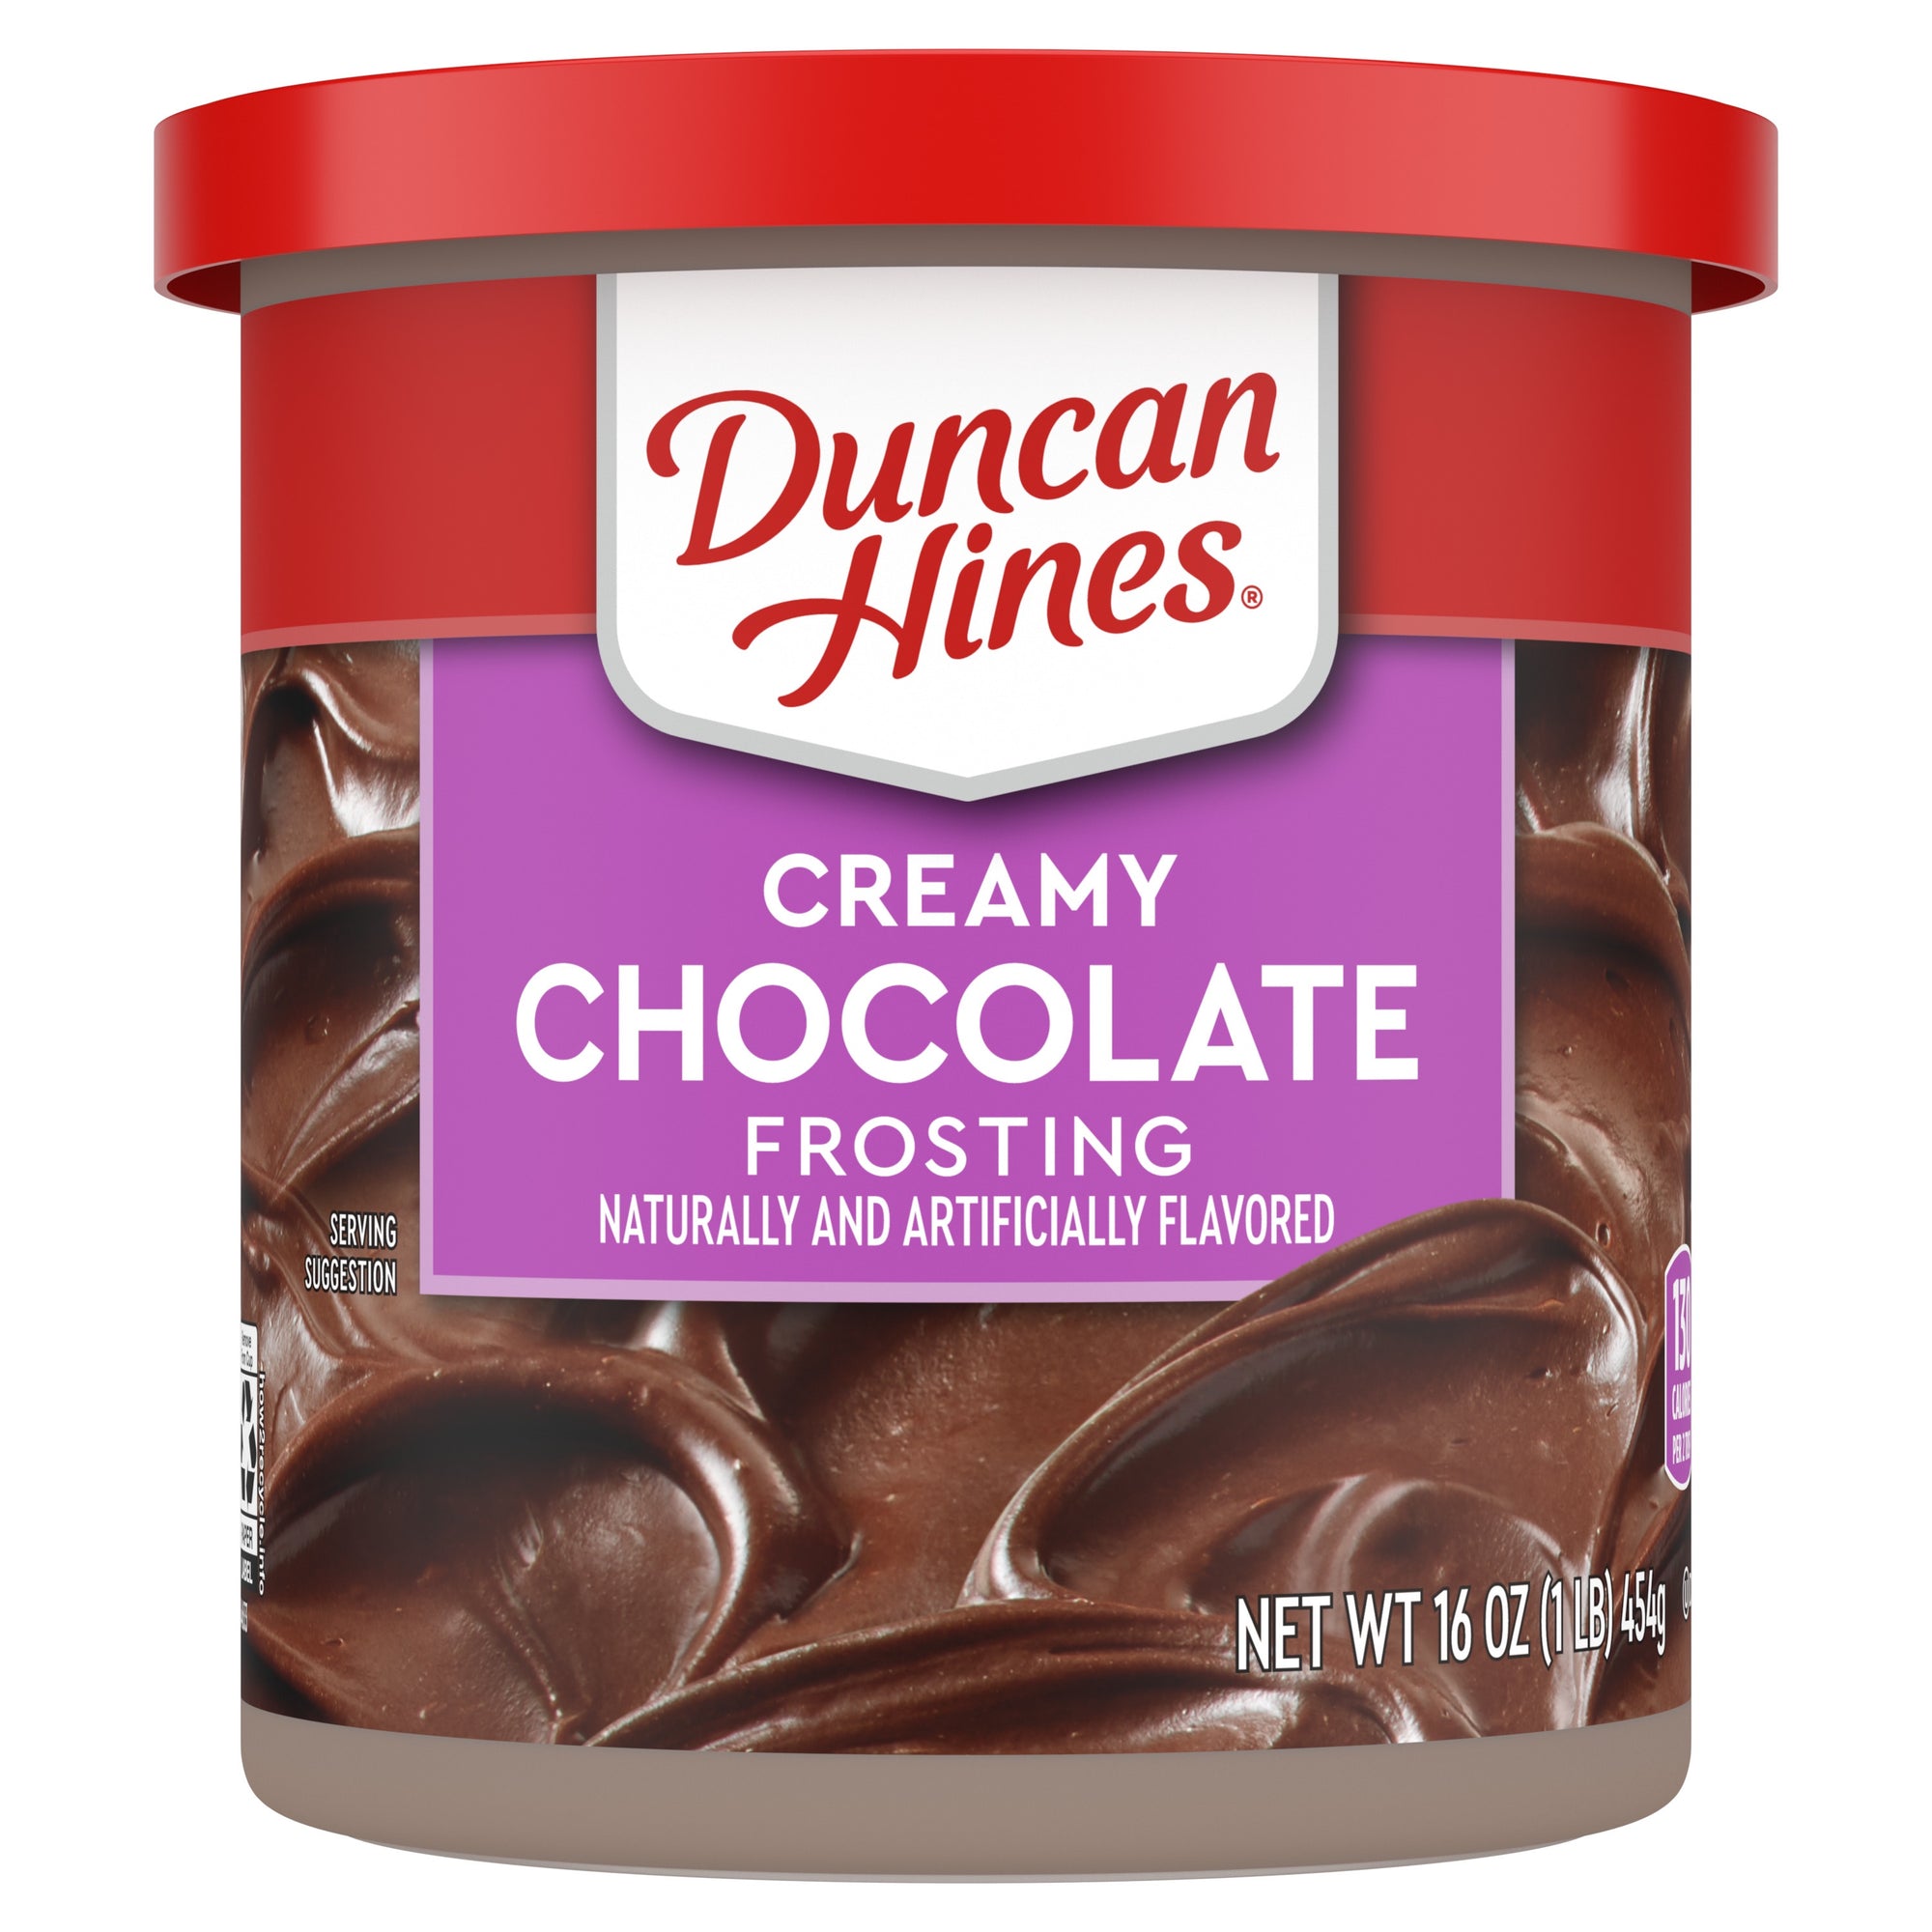 Duncan Hines Creamy Chocolate Frosting 16 oz